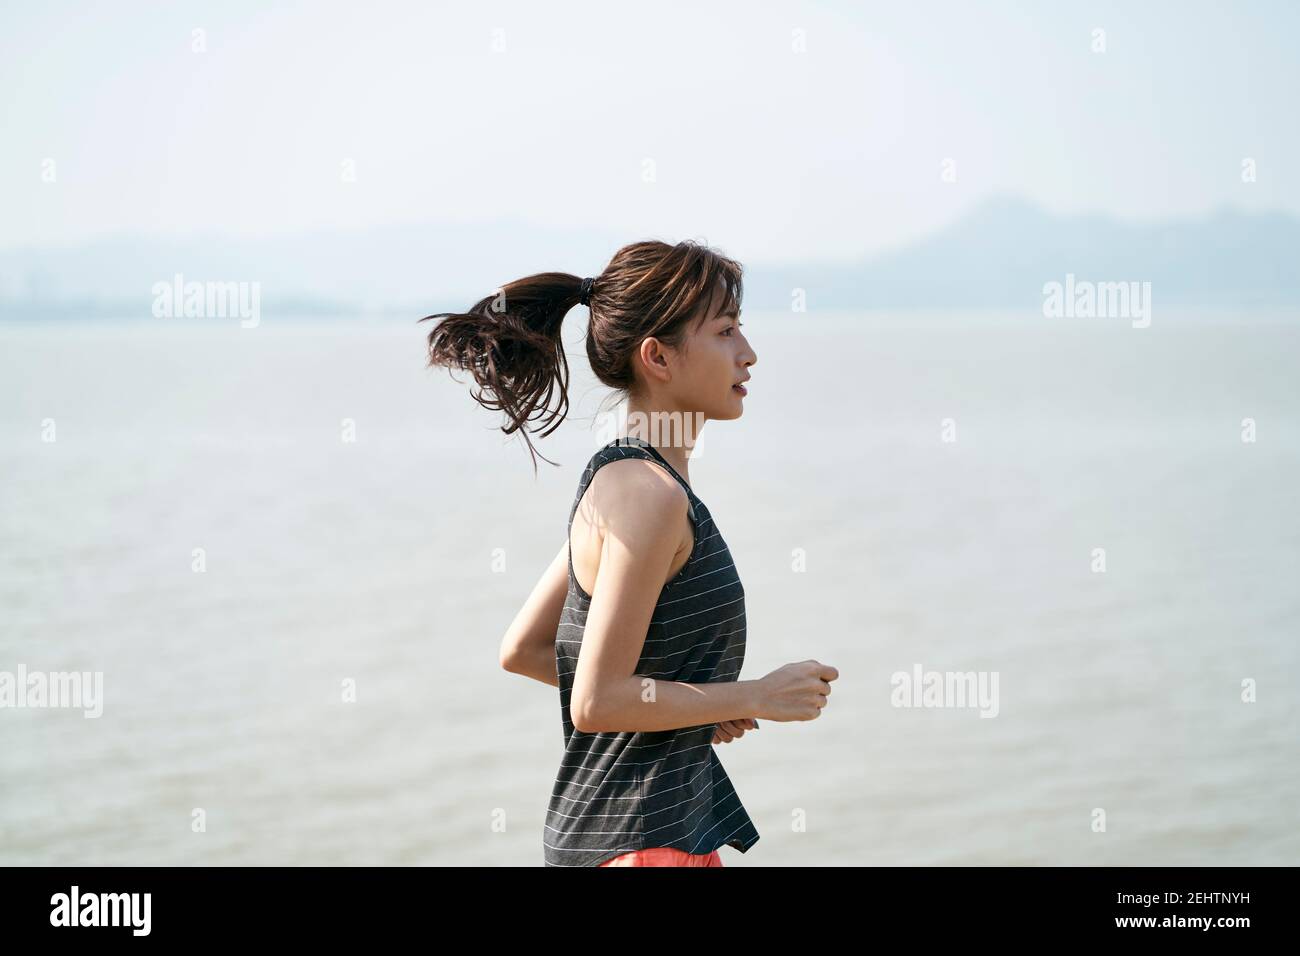 young asian woman female runner running by the sea, black and white Stock Photo